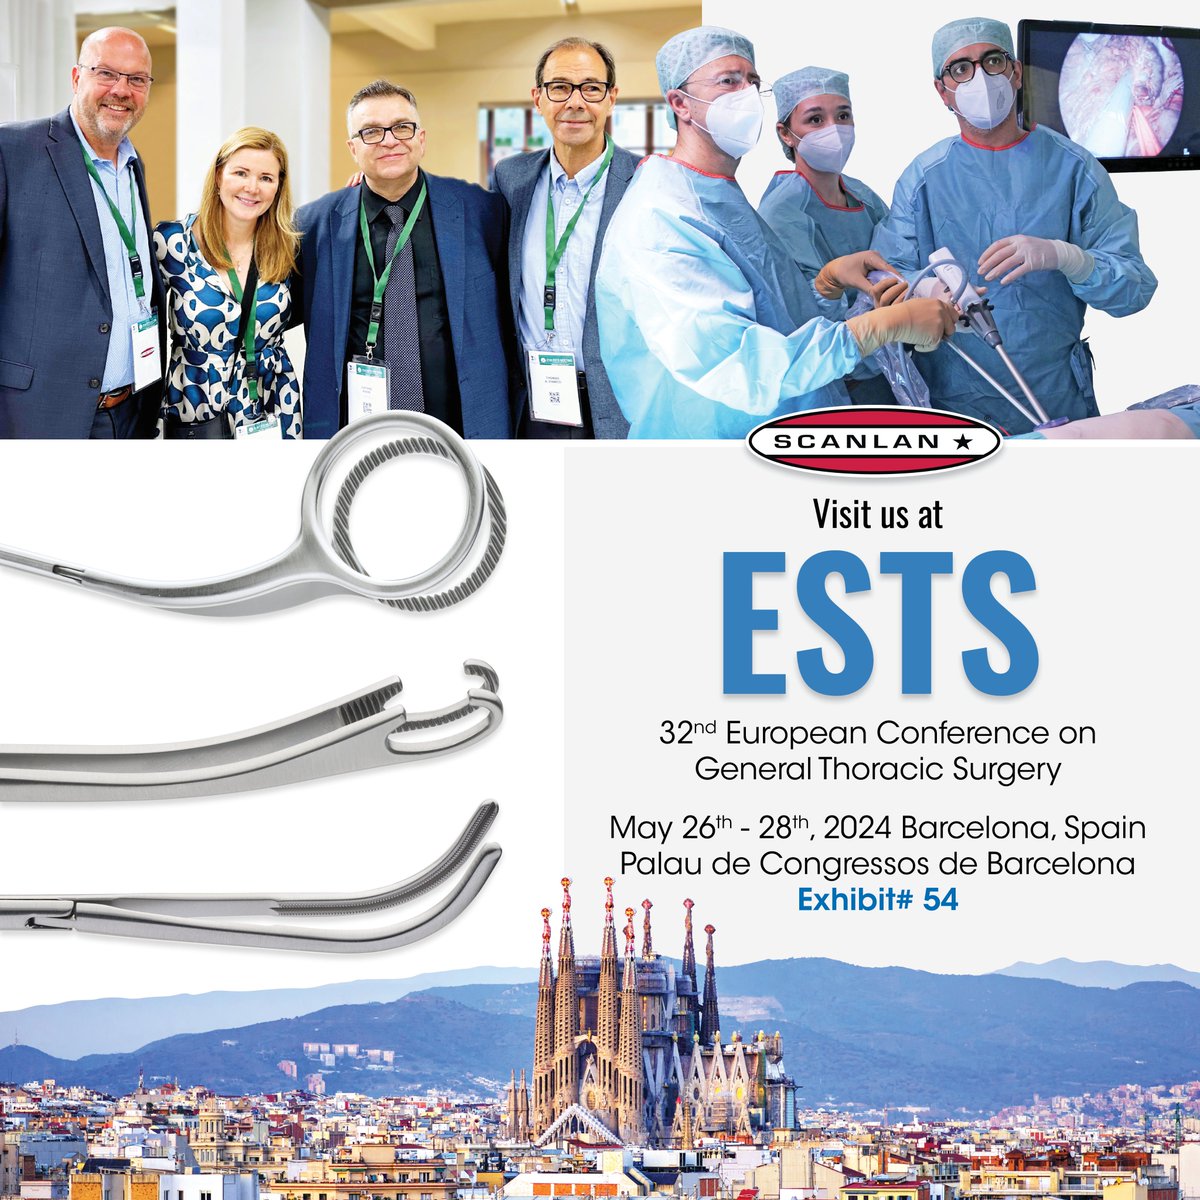 We can't wait to see you in Barcelona at #ESTS2024
Experience the Scanlan Difference at Exhibit# 54 @thoracic   bit.ly/2s9cx8S